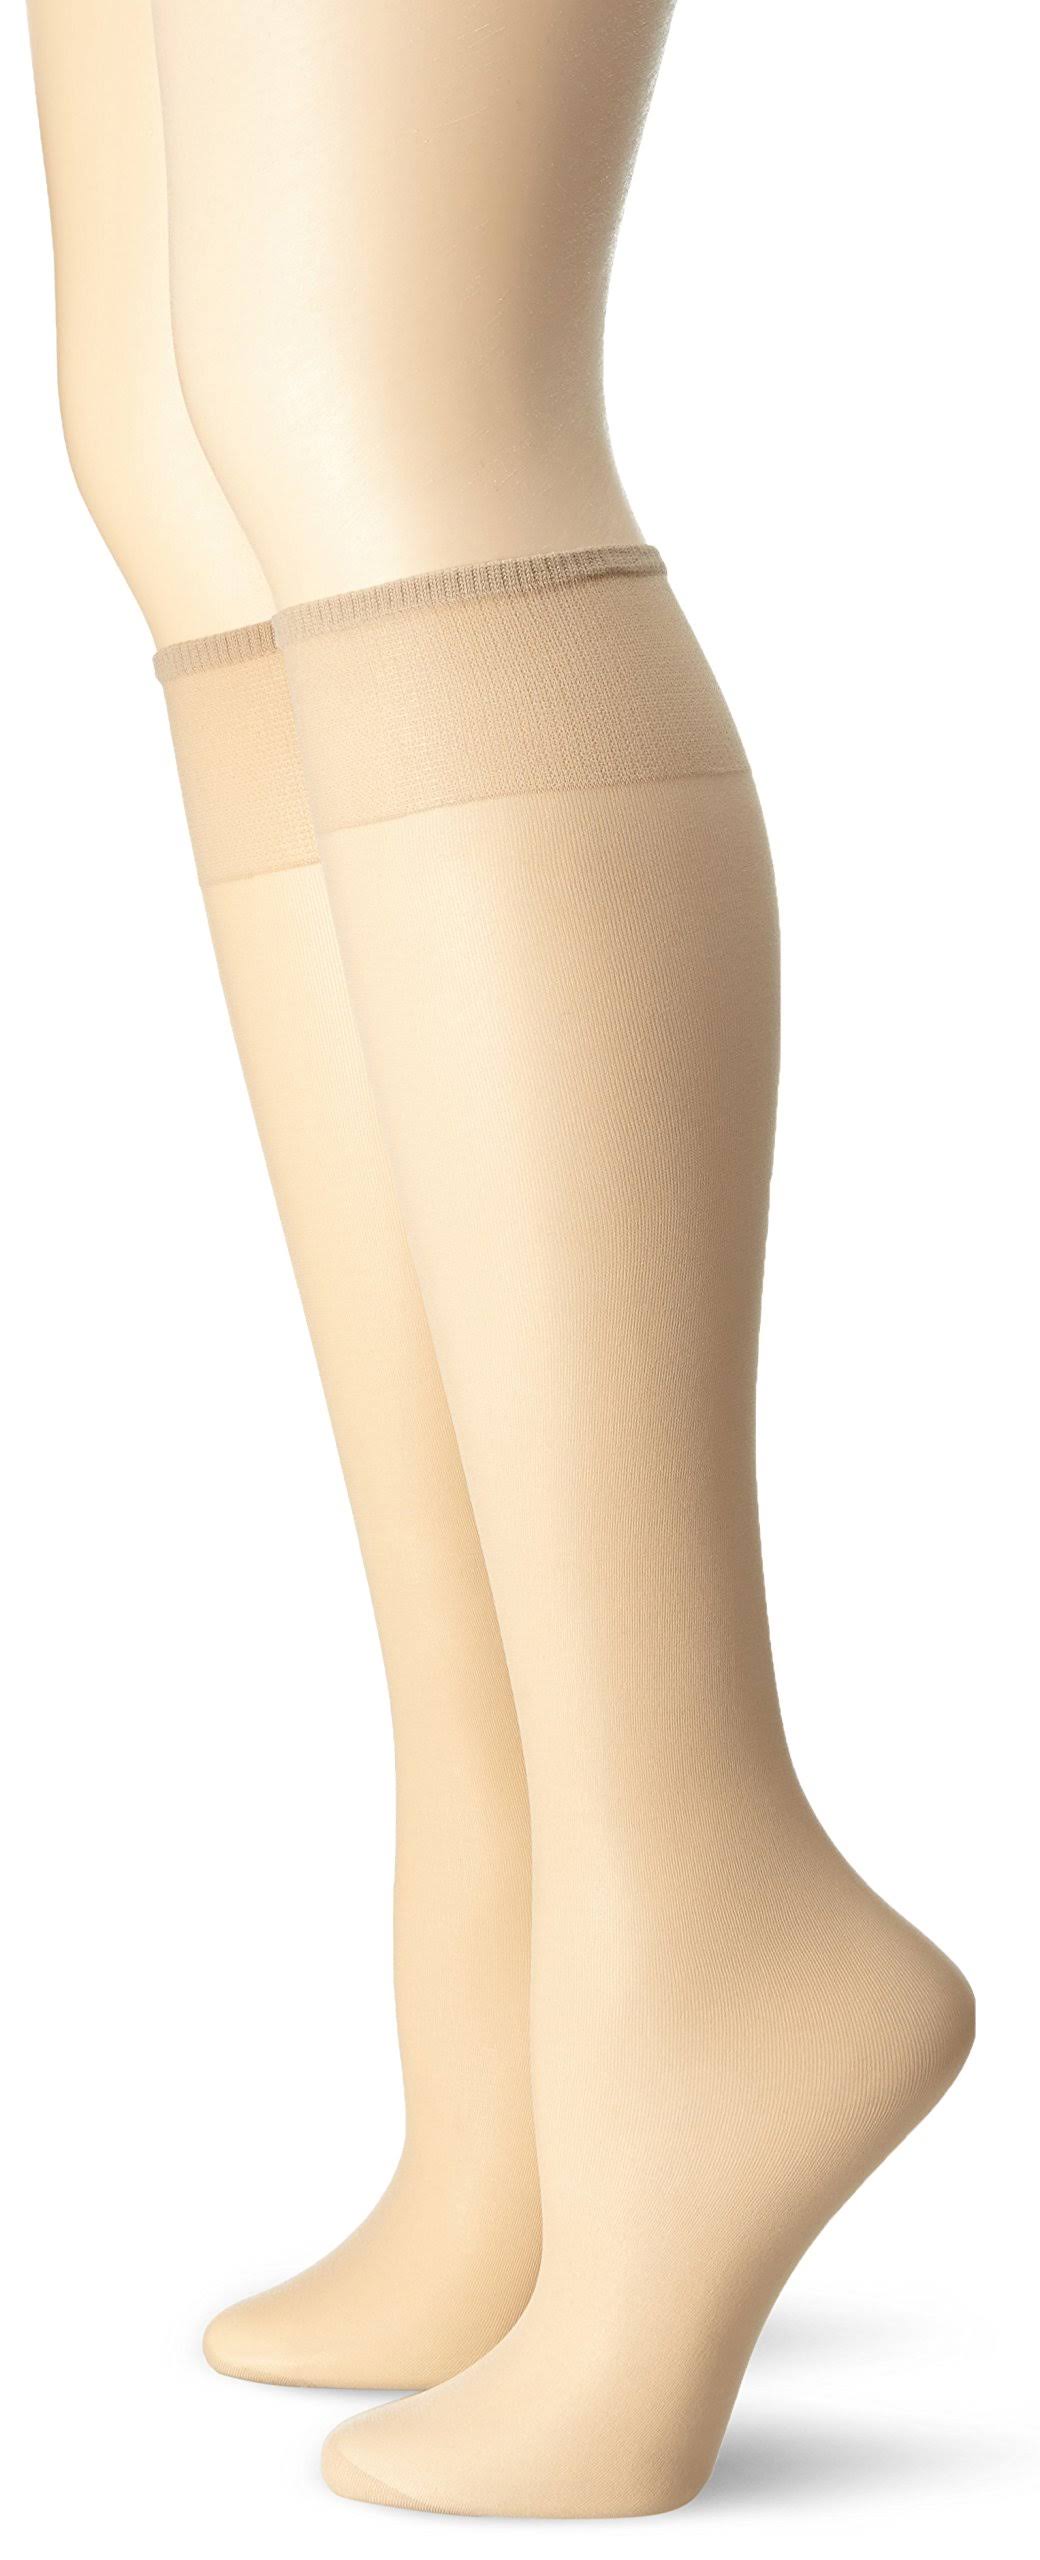 No Nonsense Women's Knee High Pantyhose with Reinforced Toe 2-Pack